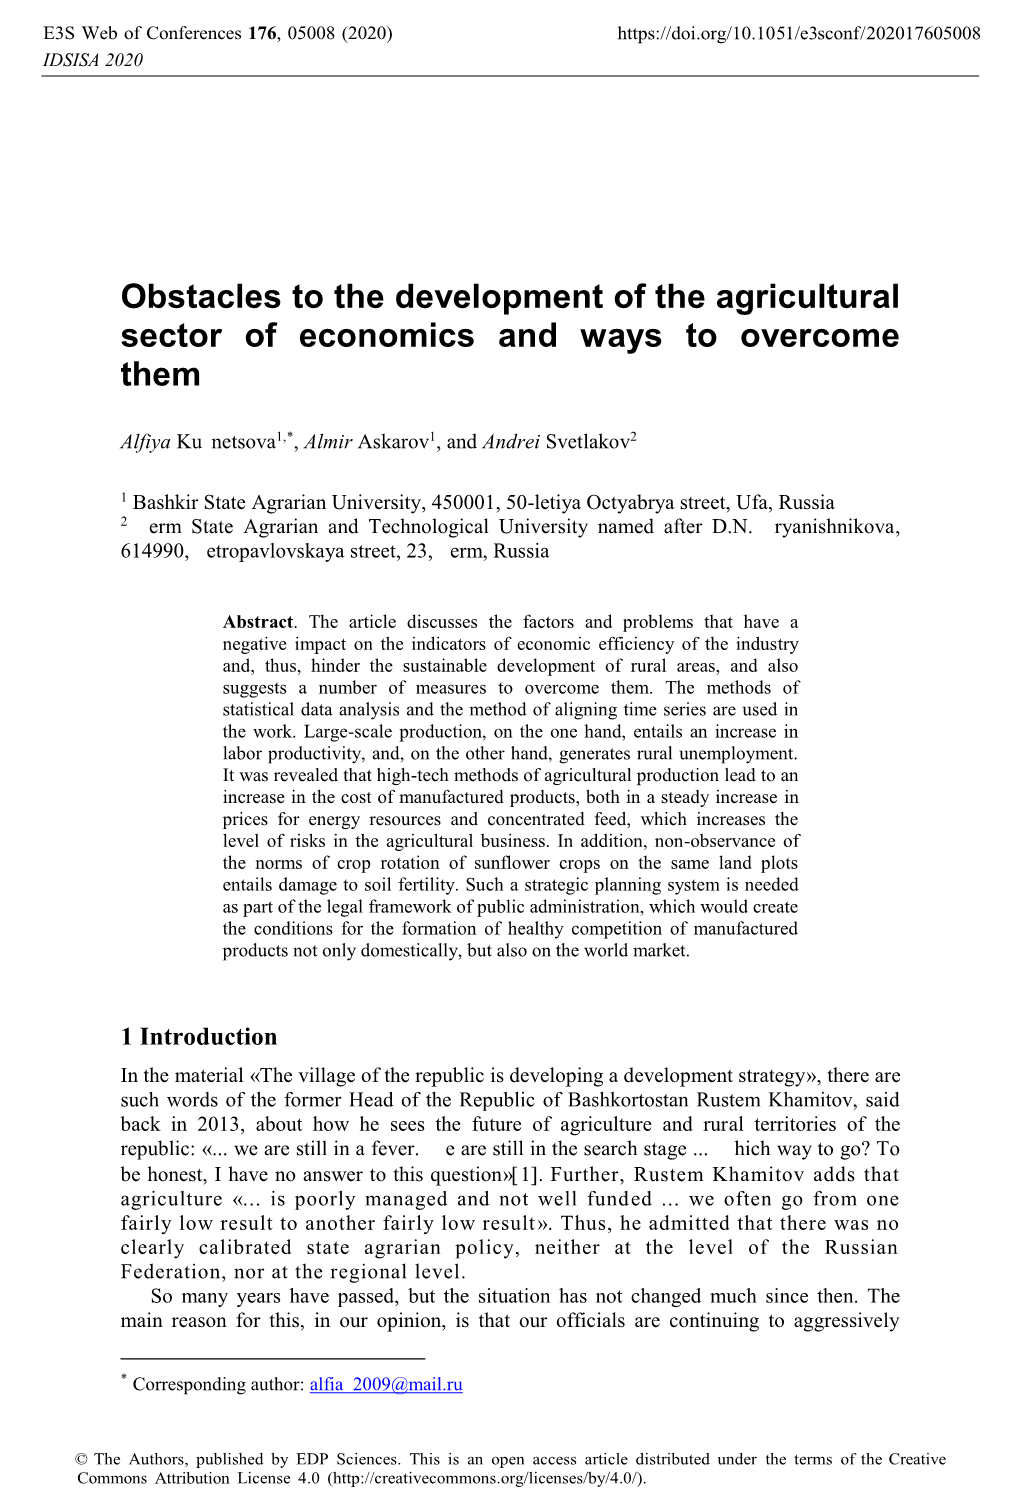 Obstacles to the Development of the Agricultural Sector of Economics and Ways to Overcome Them